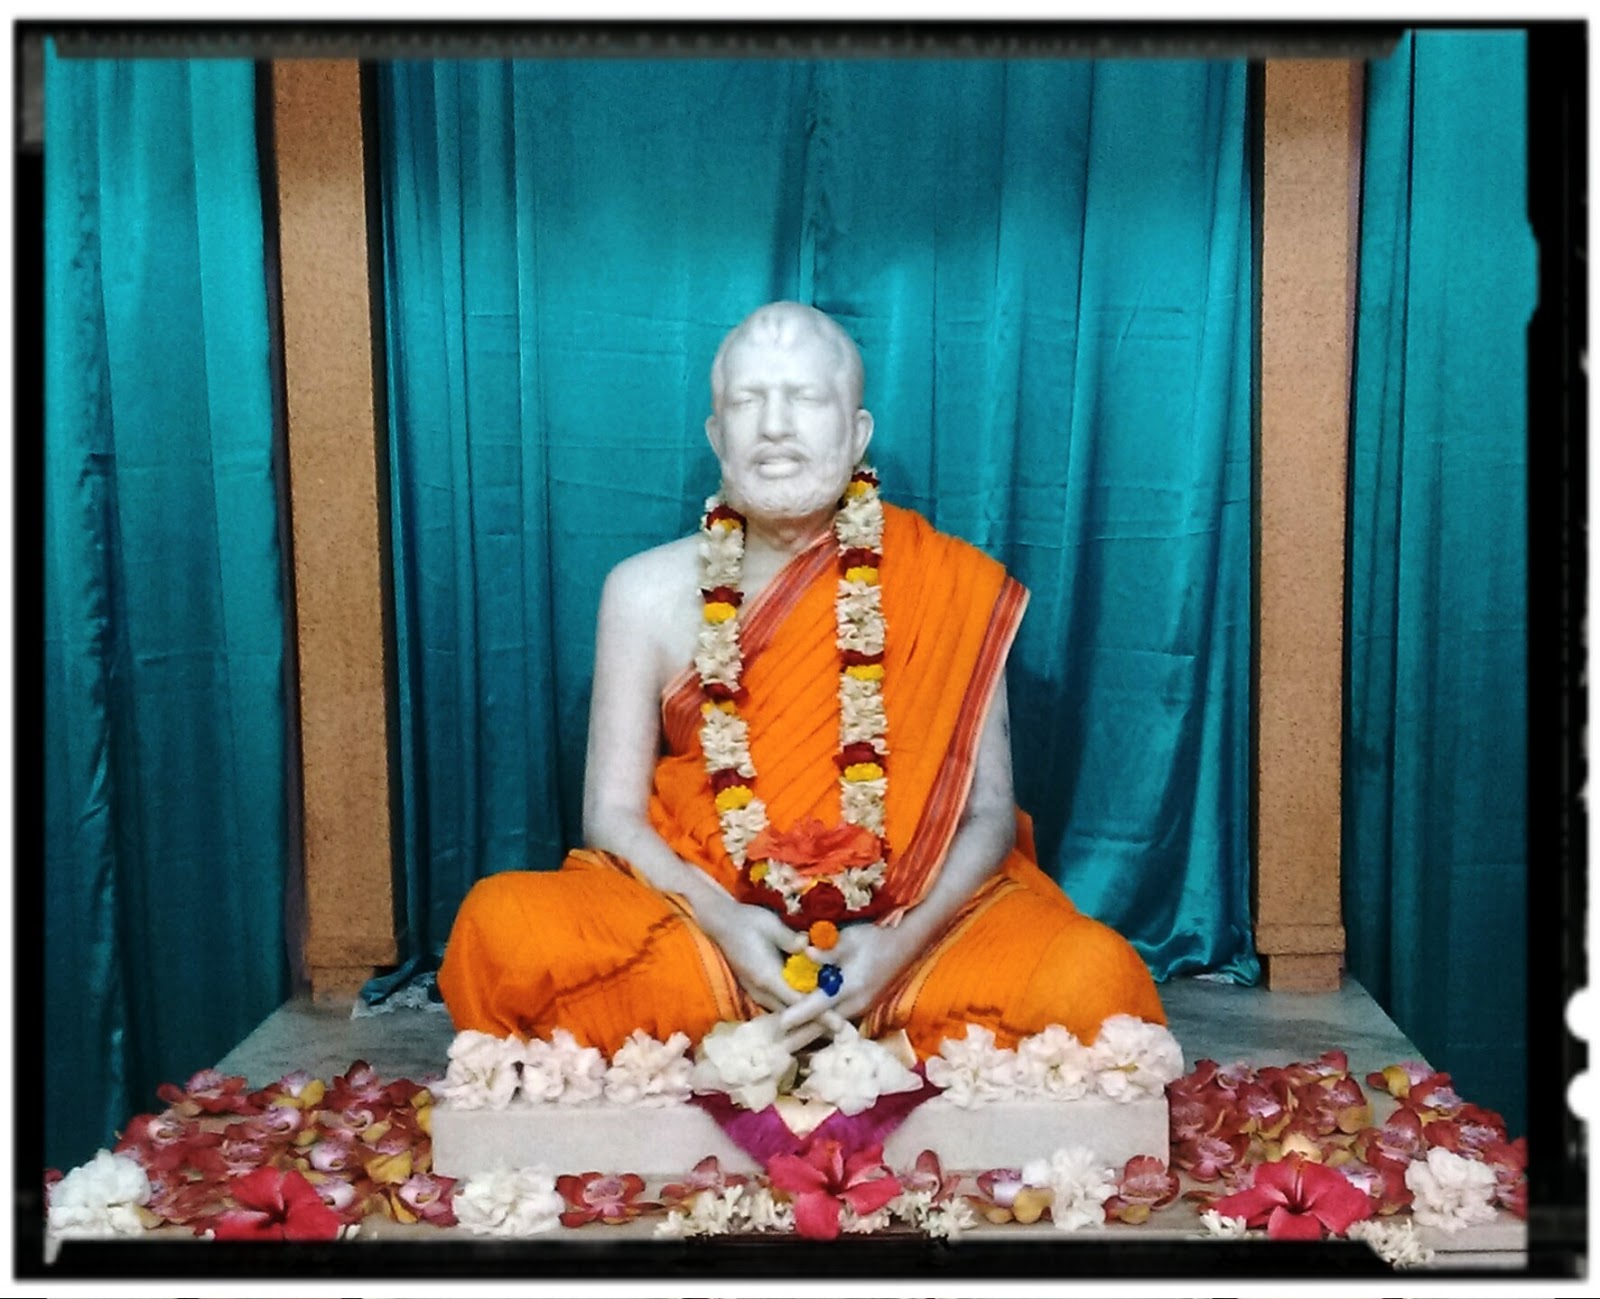 VISIT TODAY RAMAKRISHNA II The pleasures of ‘woman and gold’?